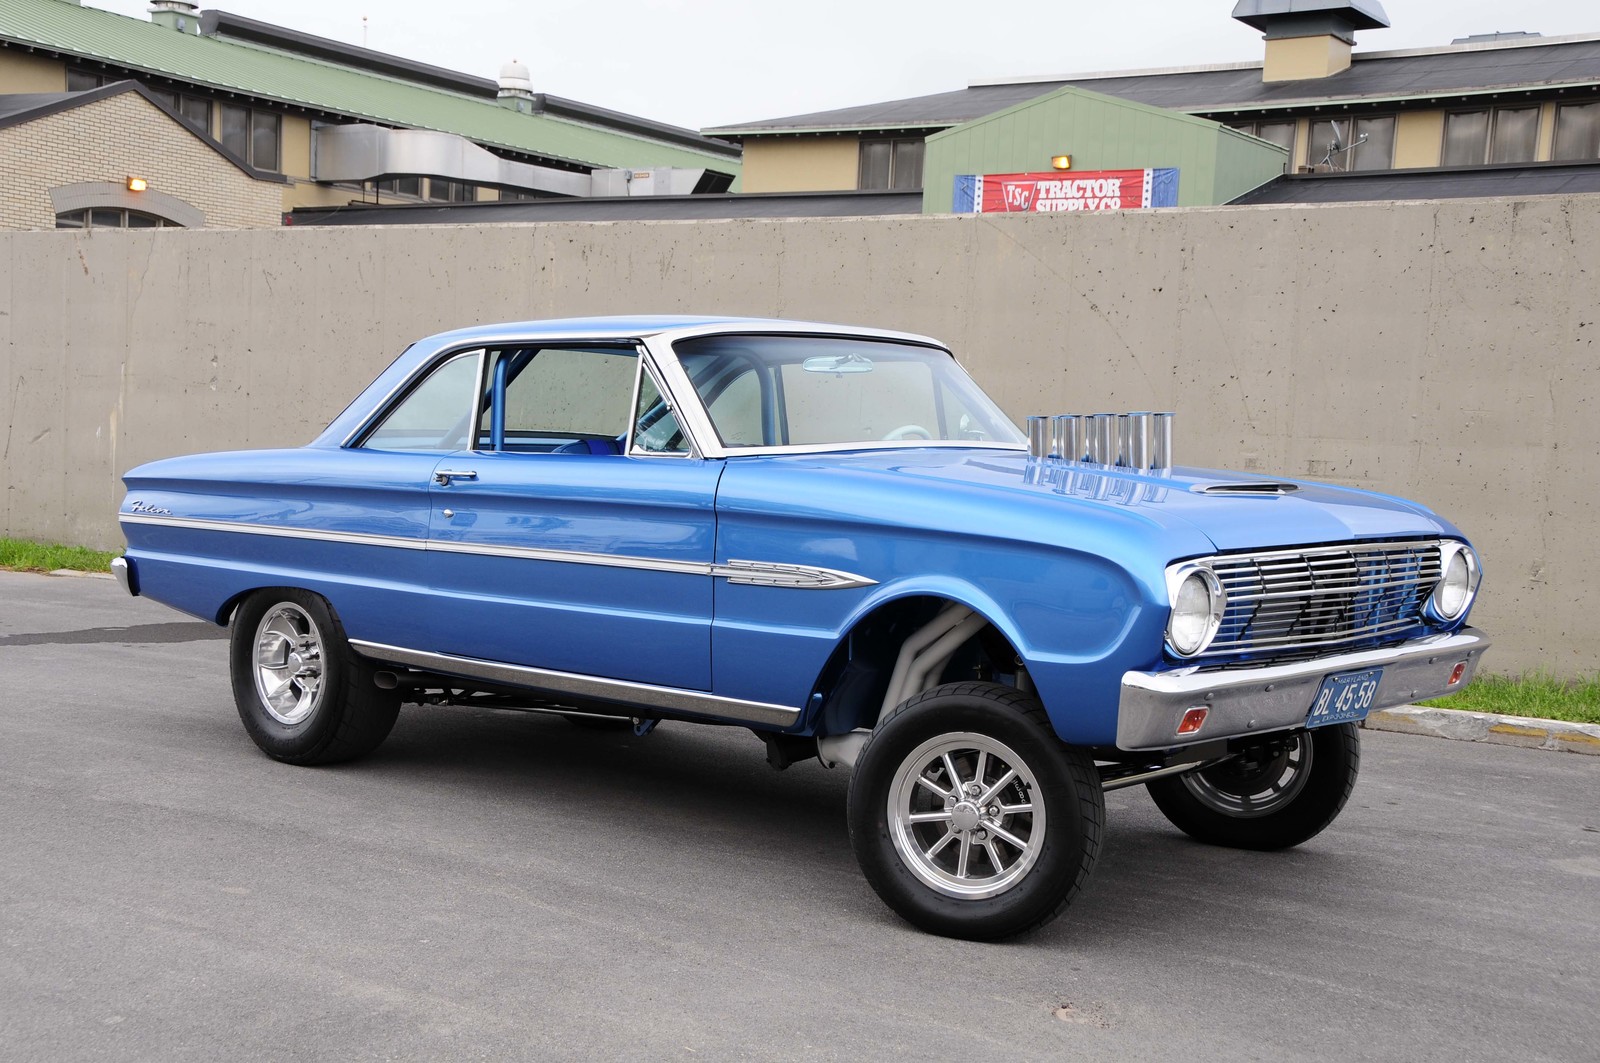 01-1963-ford-falcon-2017-sryracuse-nats-ford-performance-best-ford-in-ford-ramsey.jpg